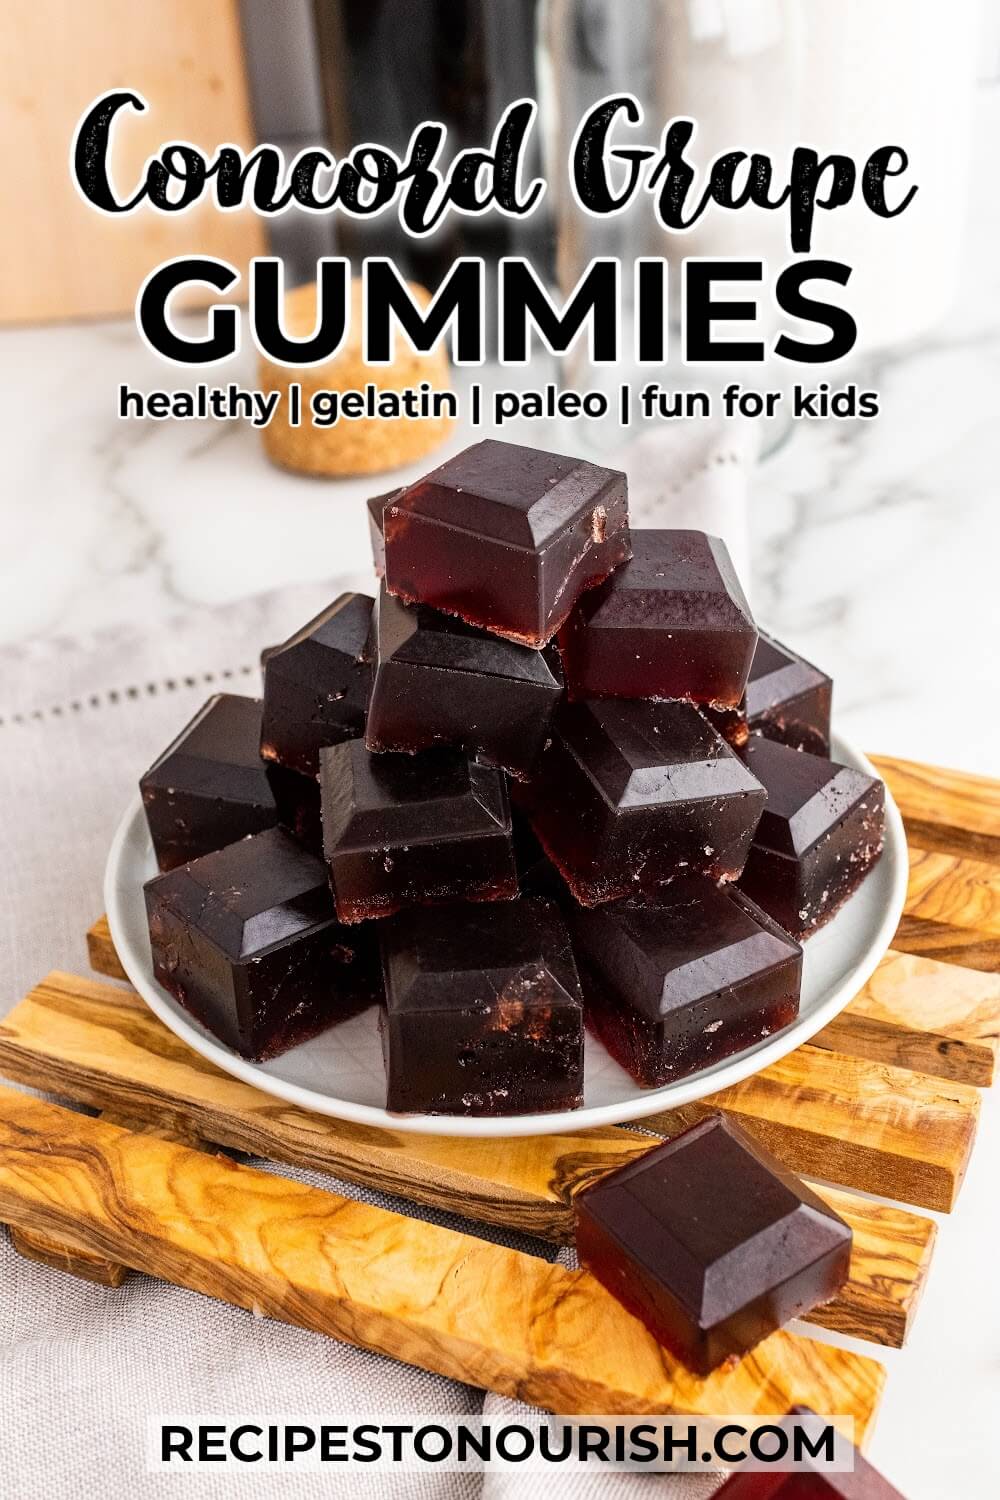 Plate with stacks of dark purple homemade gelatin gummies, sitting on top of a wooden board and text that says Concord grape Gummies, healthy, gelatin, paleo, fun for kids.